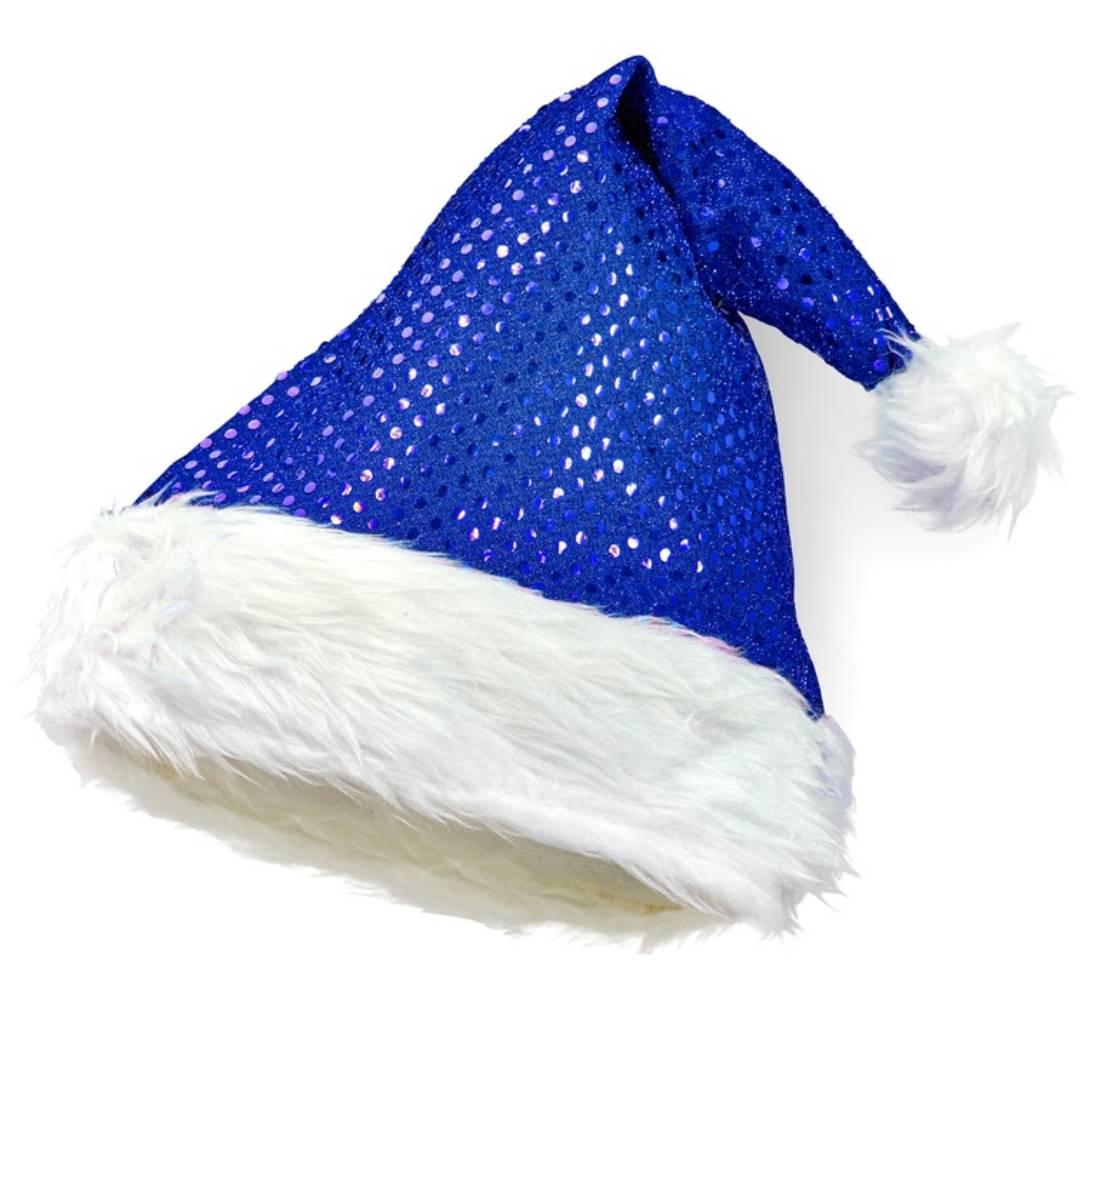 Unisex Blue Sequin traditionally styles Santa hat with white trim by Widmann 03859 available here at Karnival Costumes online party shop